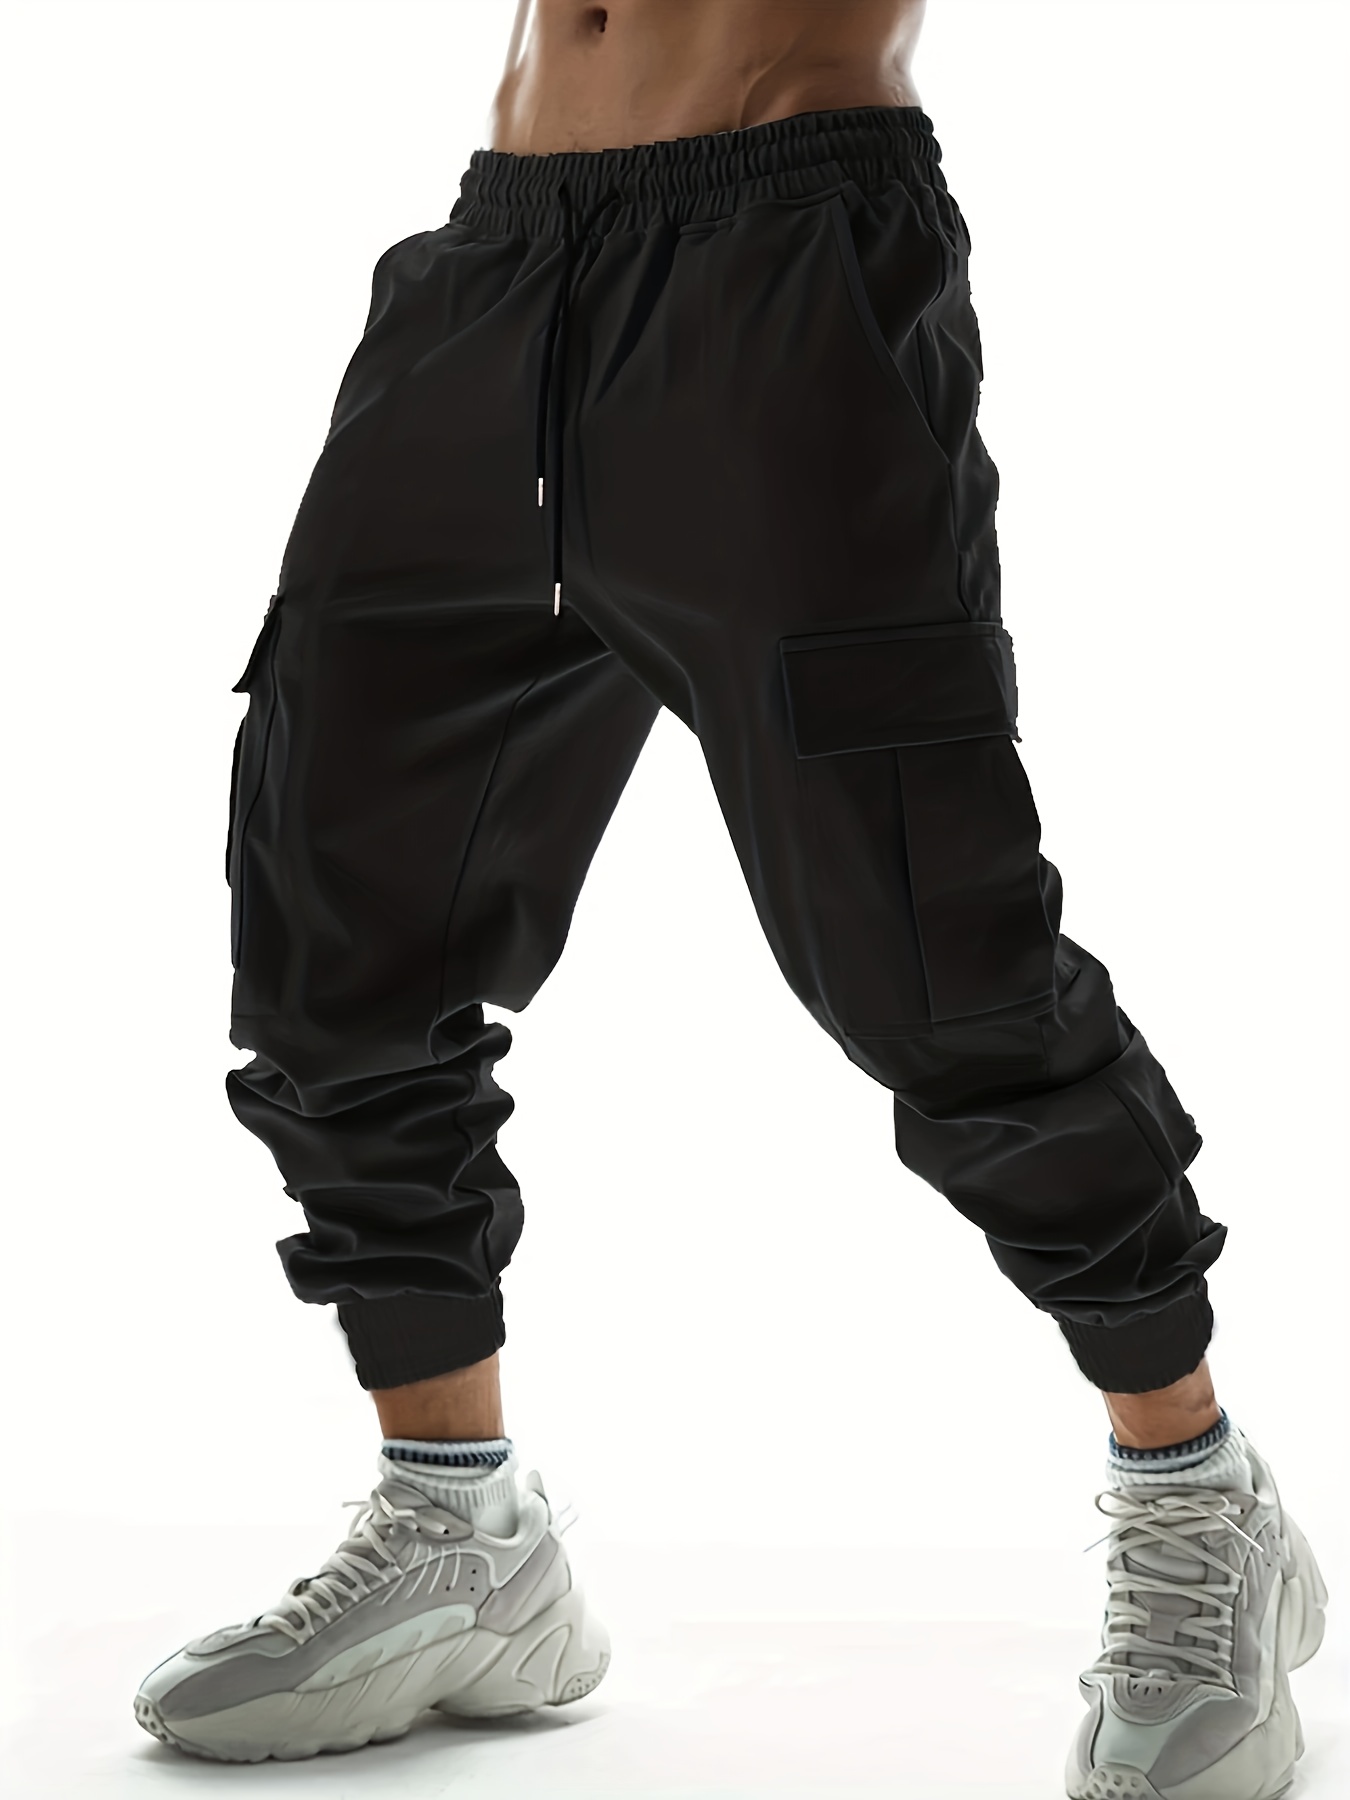 Plus Size Men's Solid Cargo Joggers Fashion Casual Pants Spring Fall Winter  Pants For Big & Tall Males, Men's Clothing